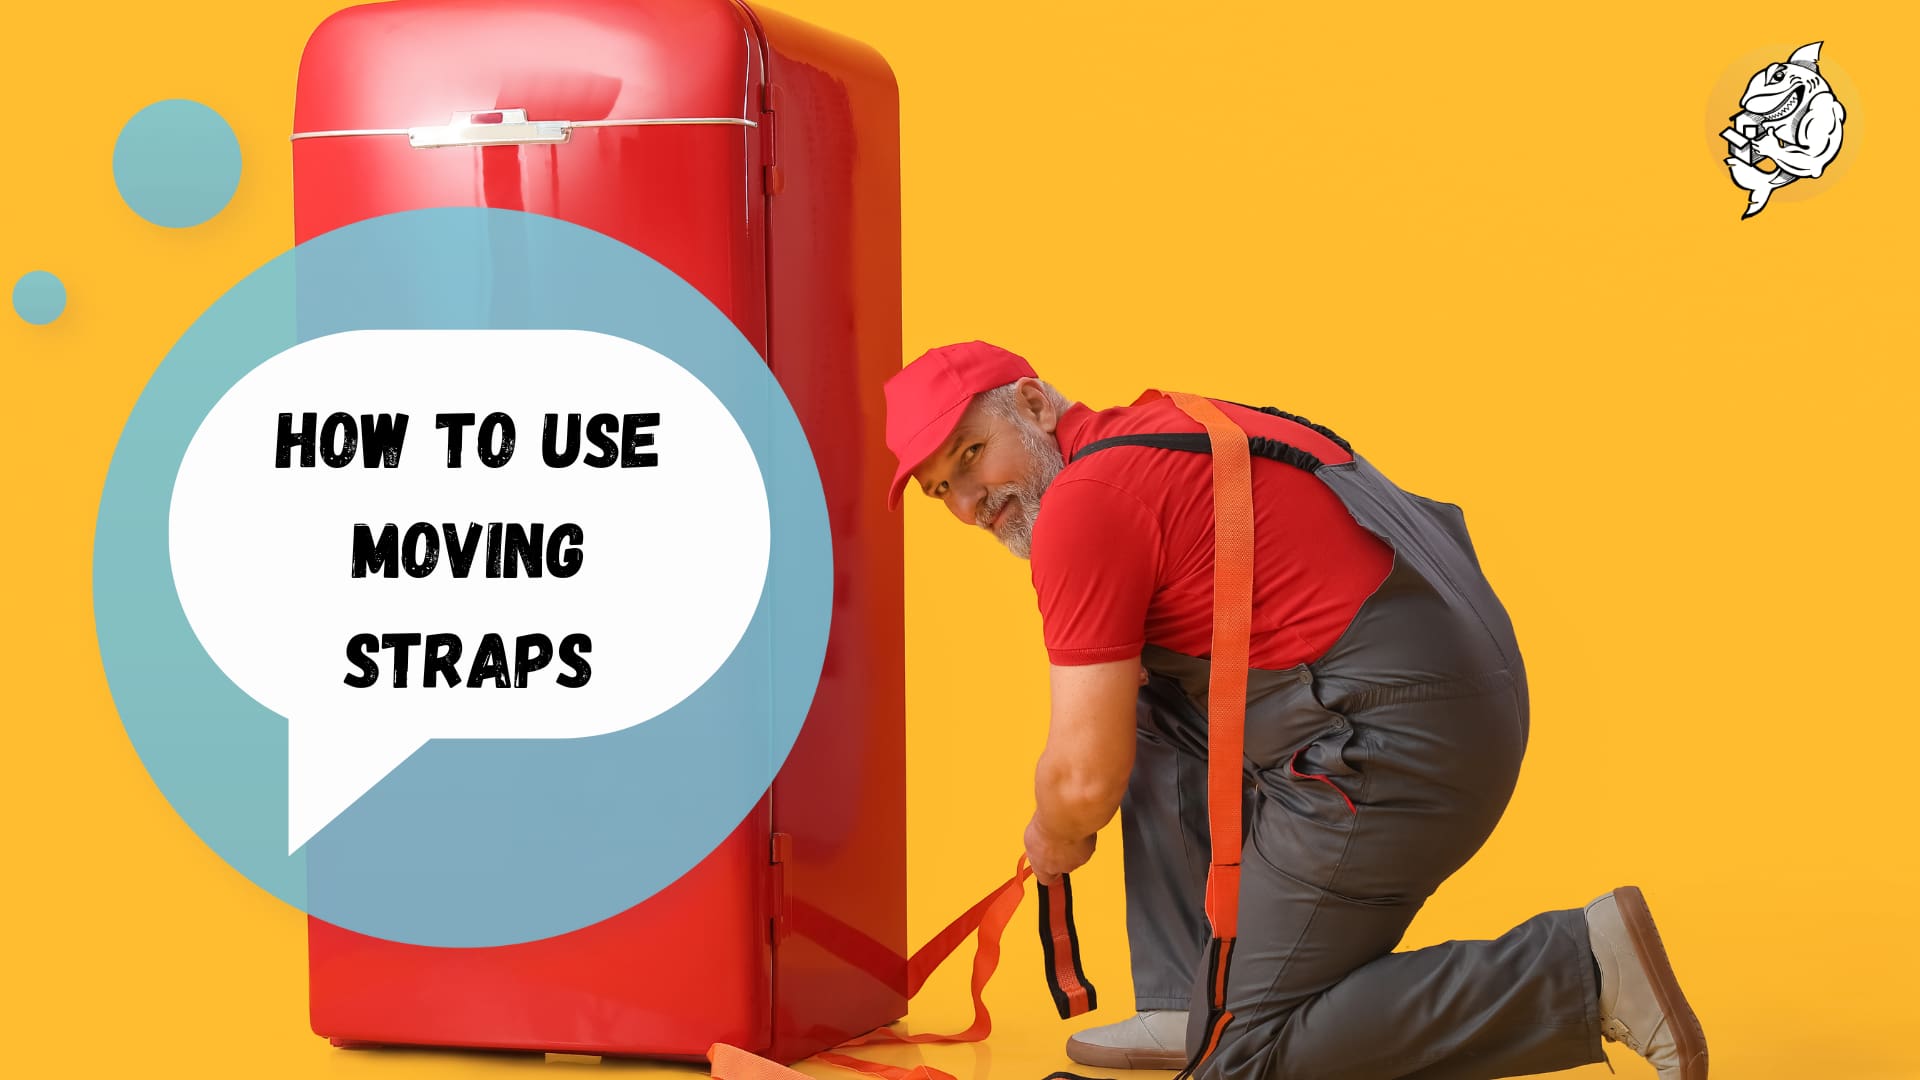 How to Use Moving Straps